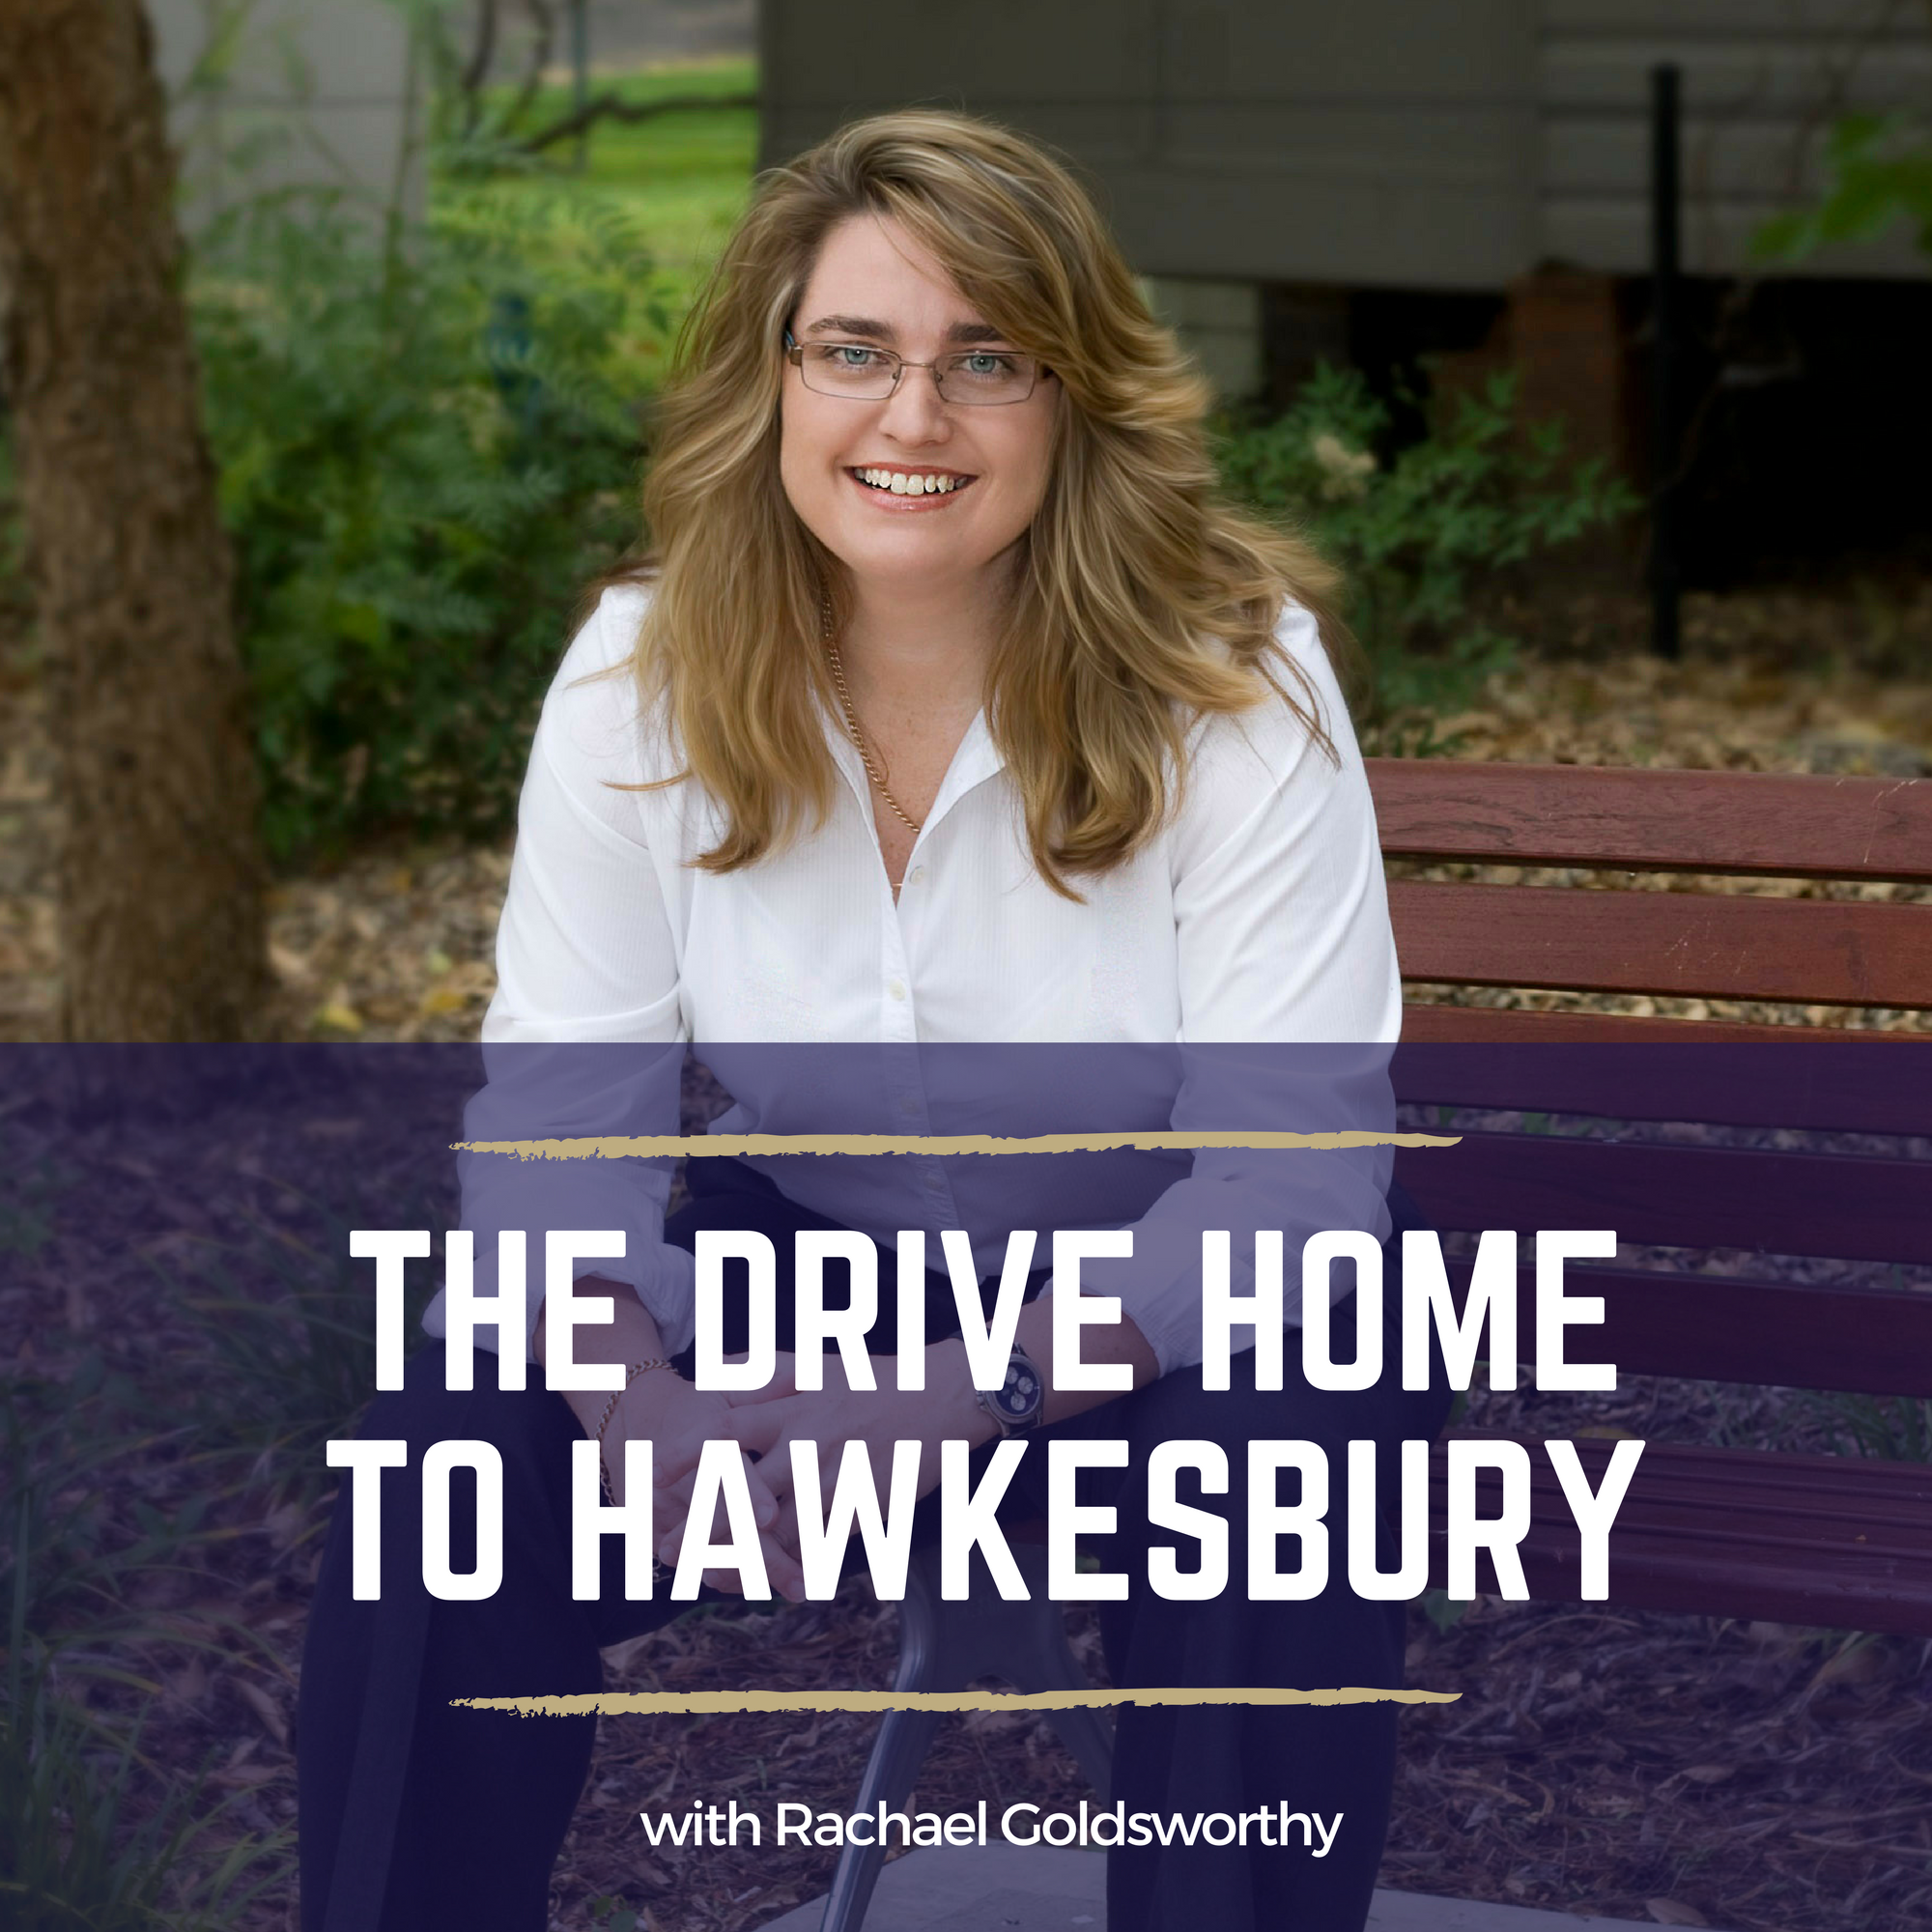 The Drive Home to Hawkesbury with Rachael Goldsworthy